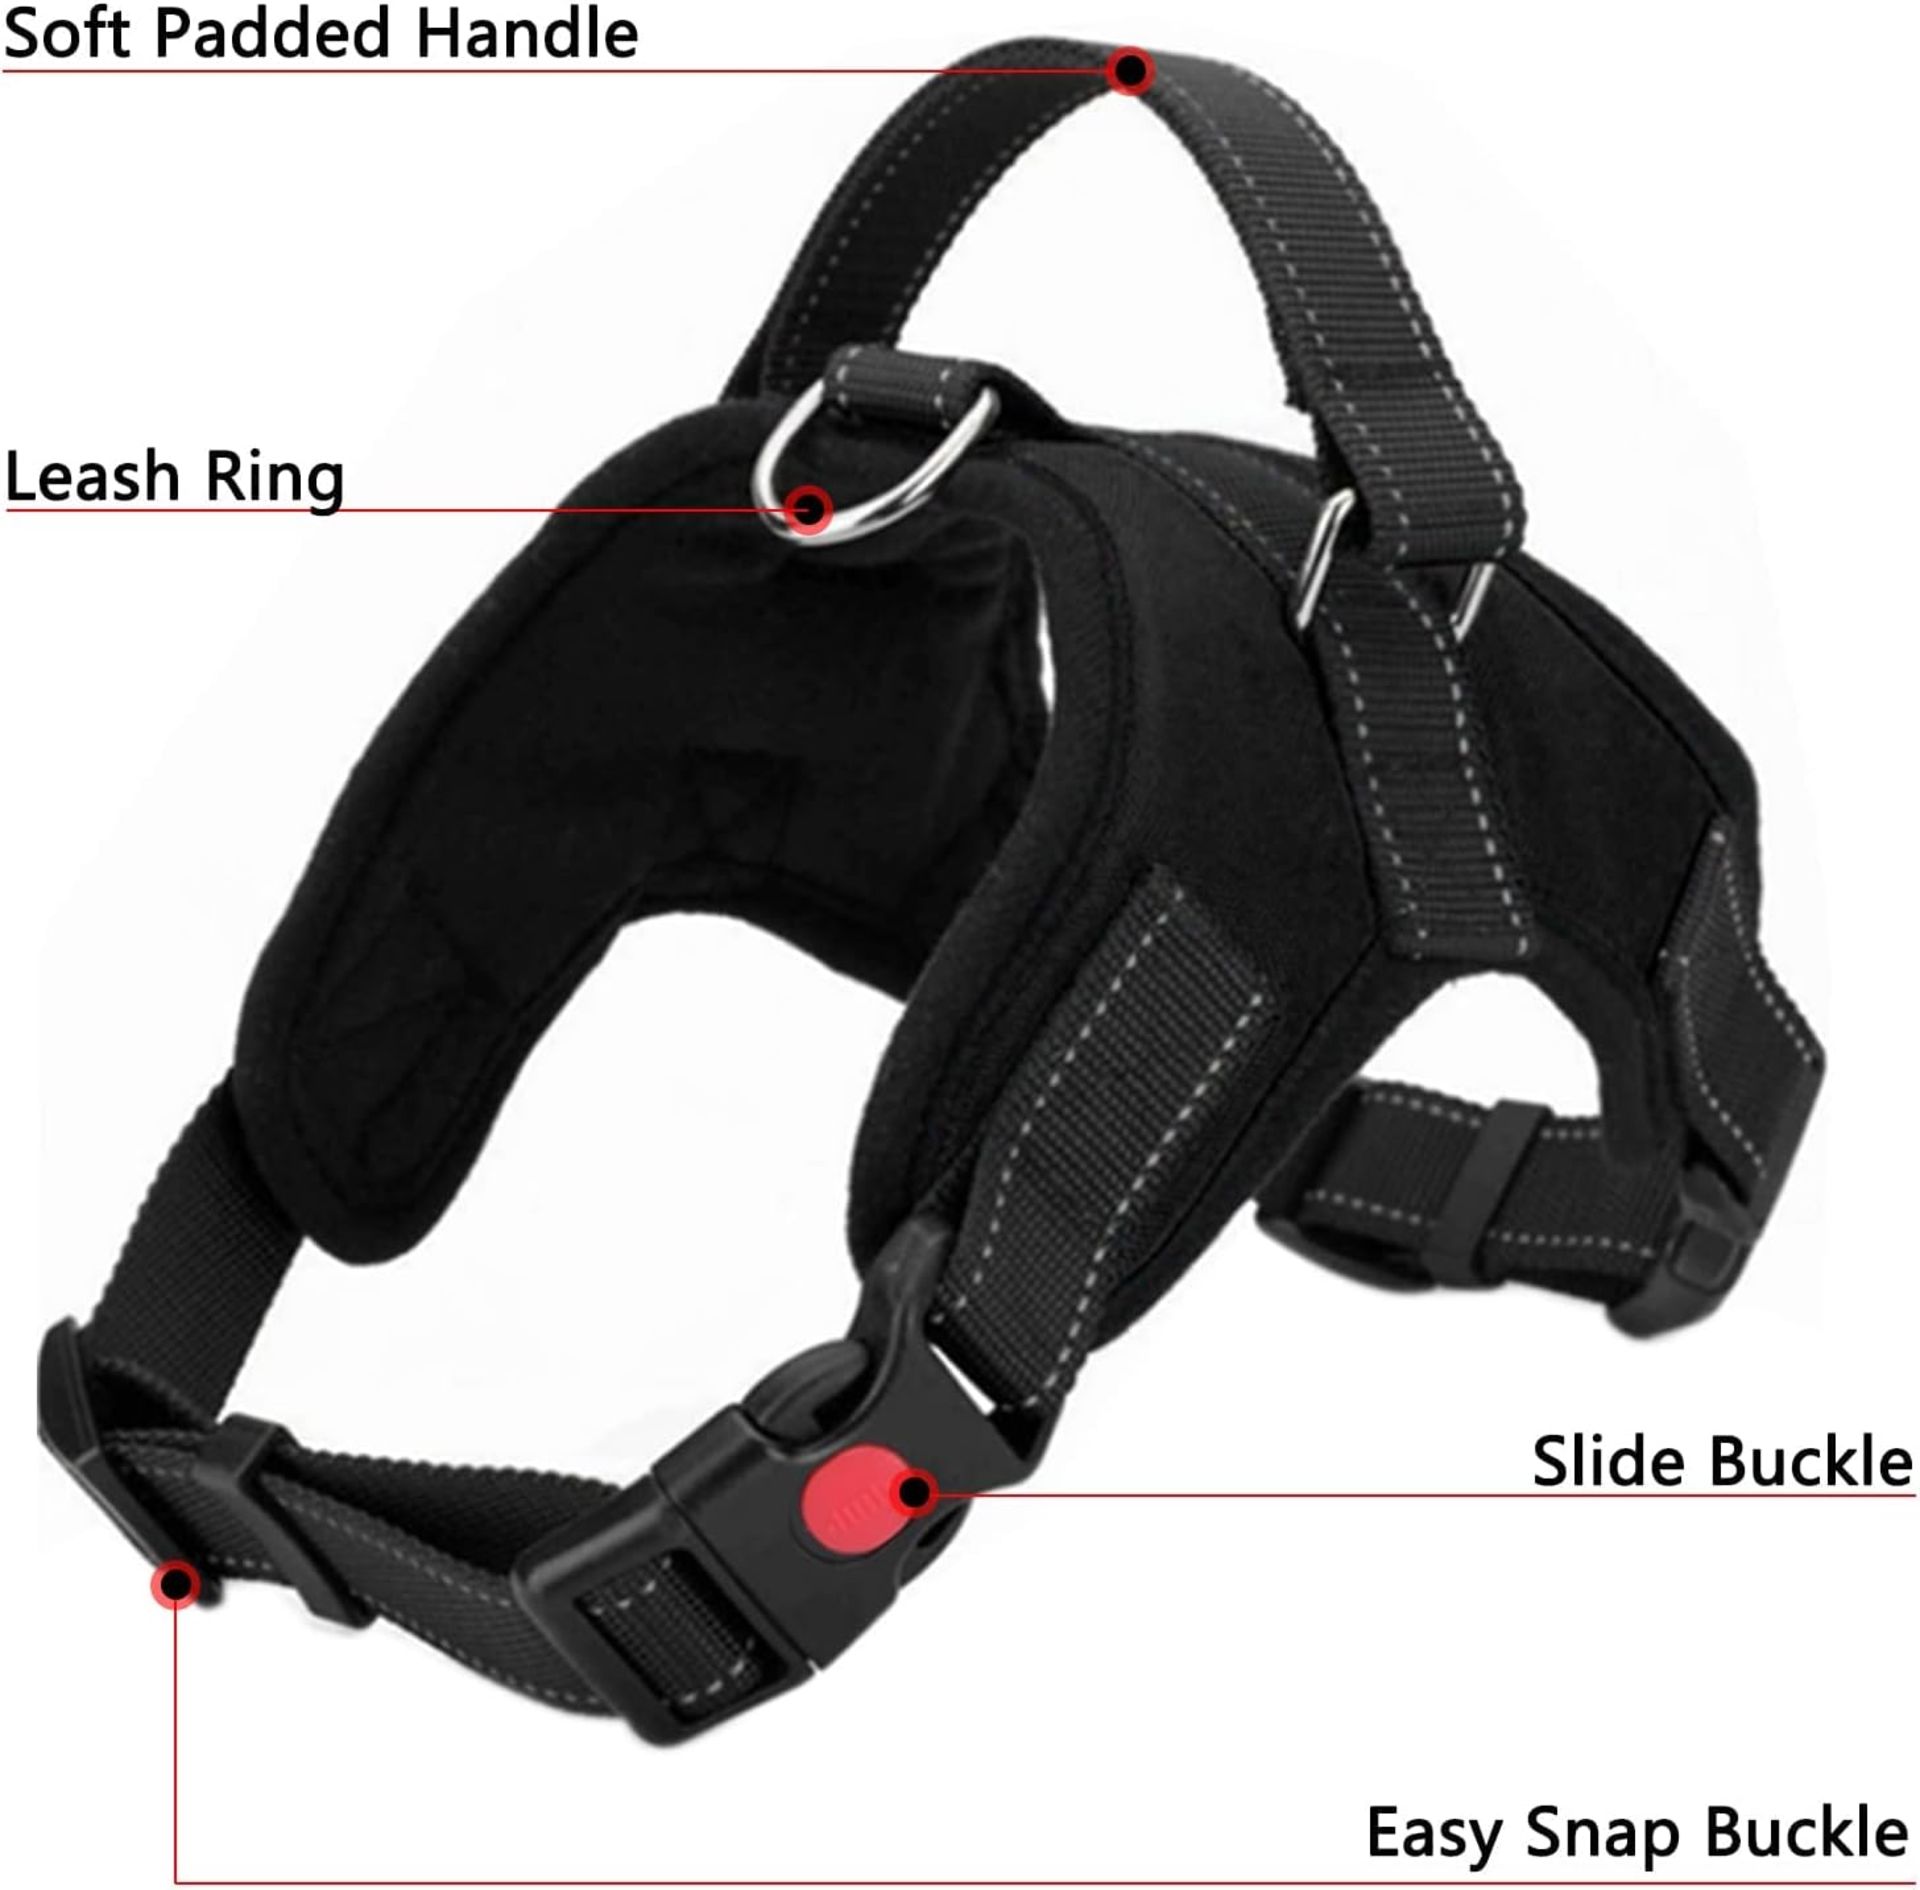 300 X JOBLOT DOG HARNESSES STRONG MIXED SIZES AND COLORS - Image 5 of 7